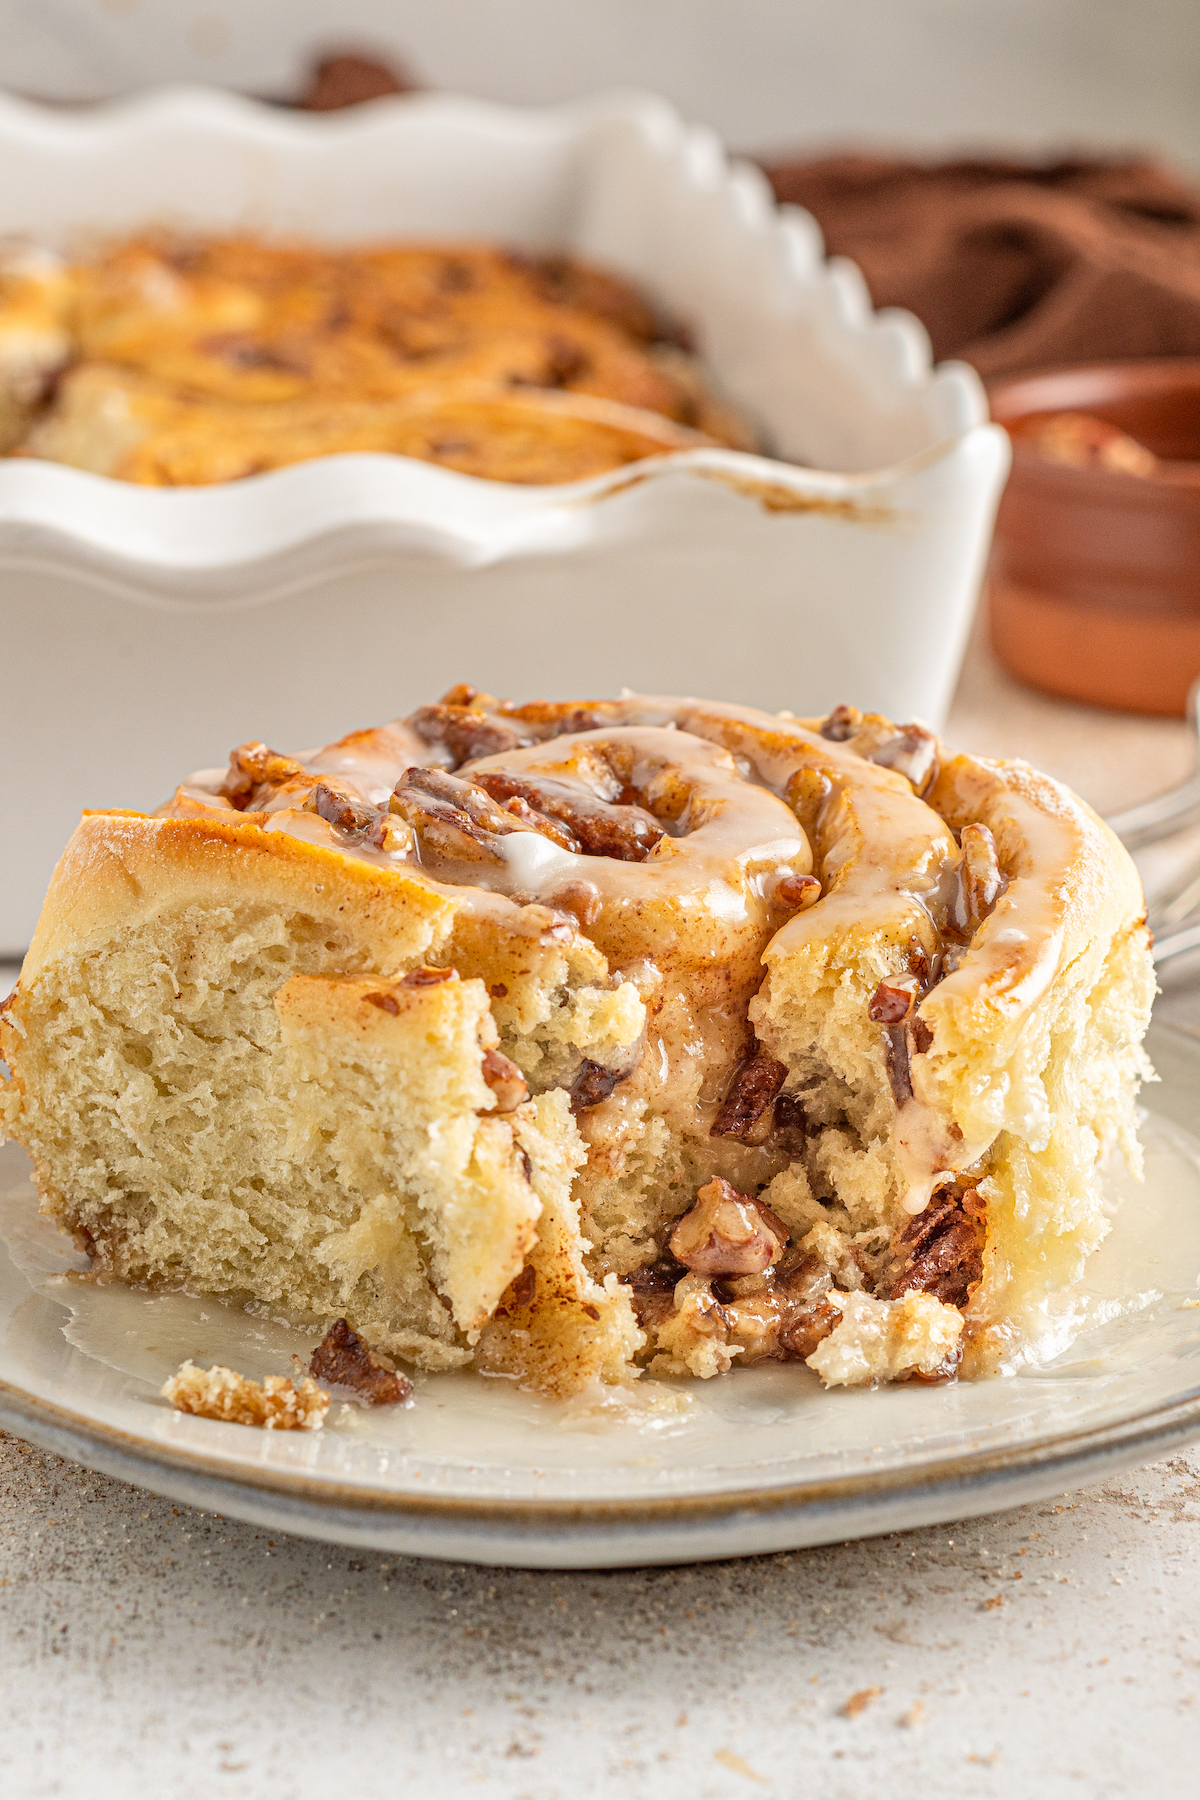 A pecan cinnamon roll on a plate in front of a baking dish.